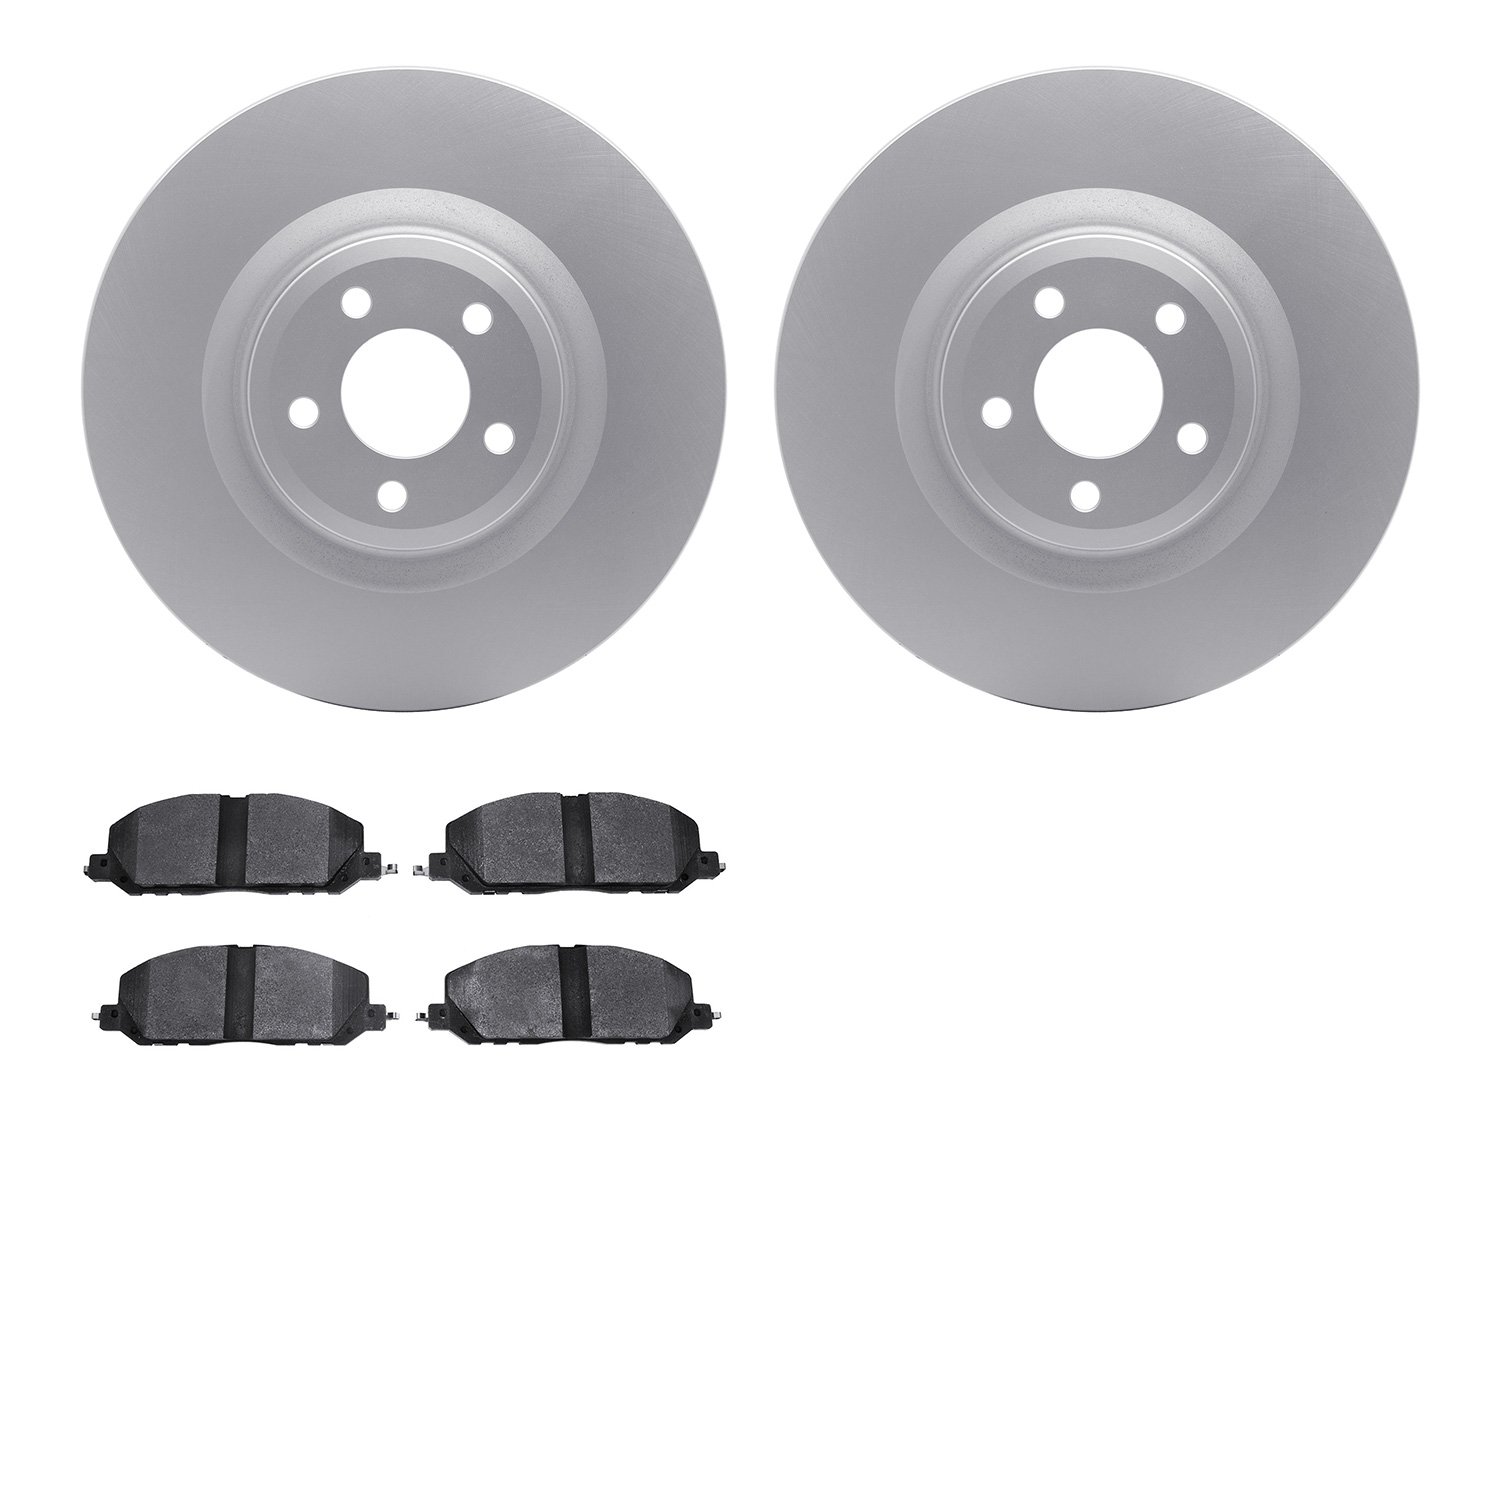 4502-54245 Geospec Brake Rotors w/5000 Advanced Brake Pads Kit, Fits Select Ford/Lincoln/Mercury/Mazda, Position: Front